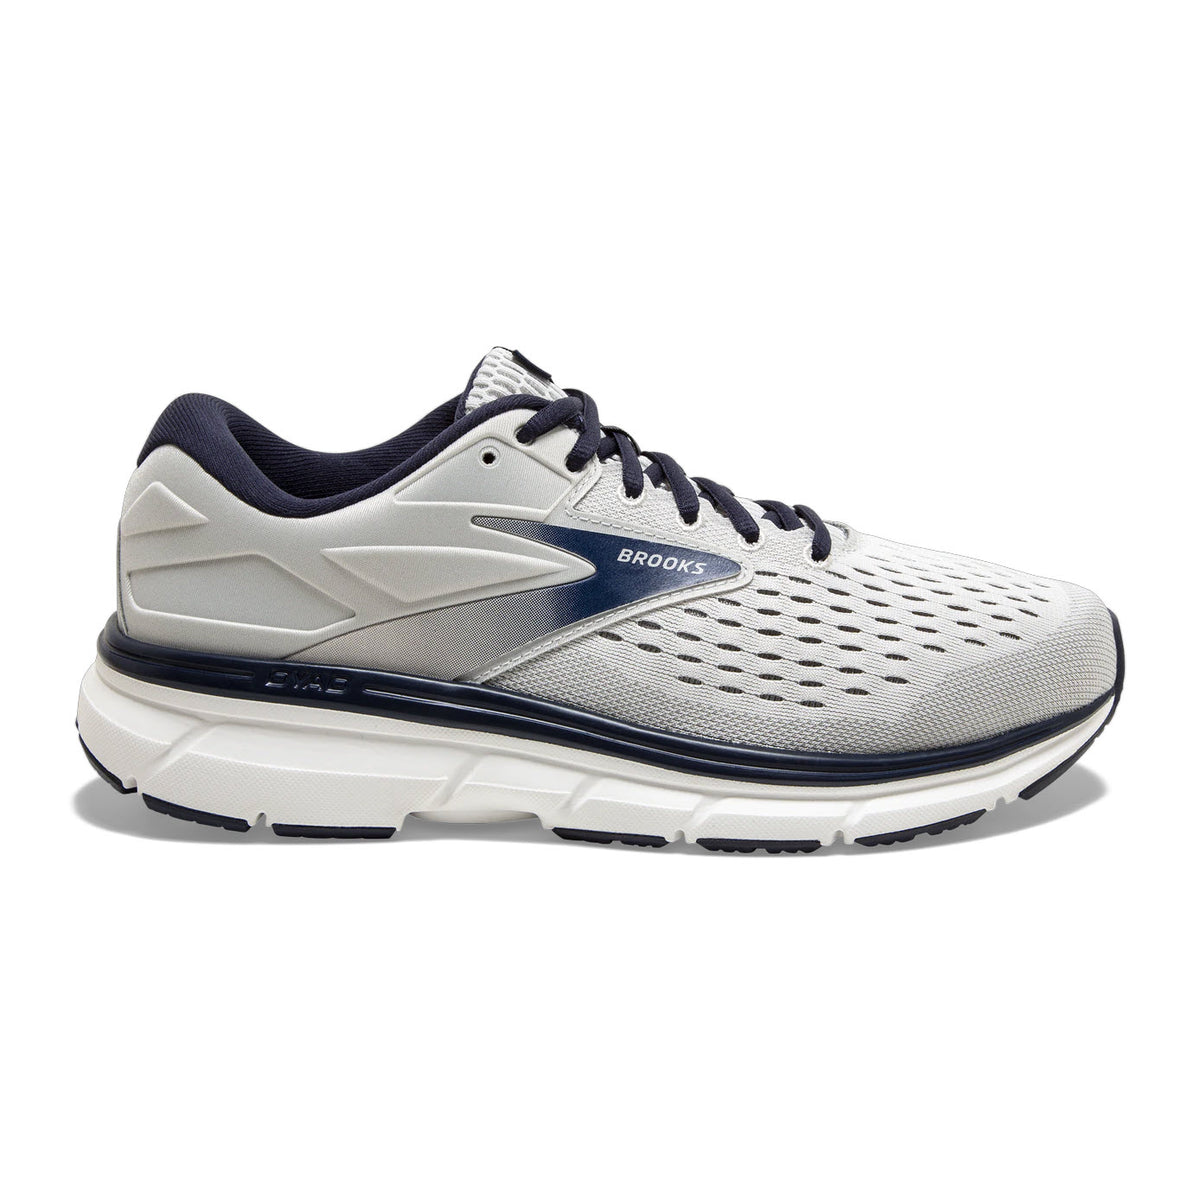 A single gray and white Brooks Dyad 11 Antarctica/Grey/Peacock running shoe, featuring cushioned comfort and the Brooks brand logo on it.